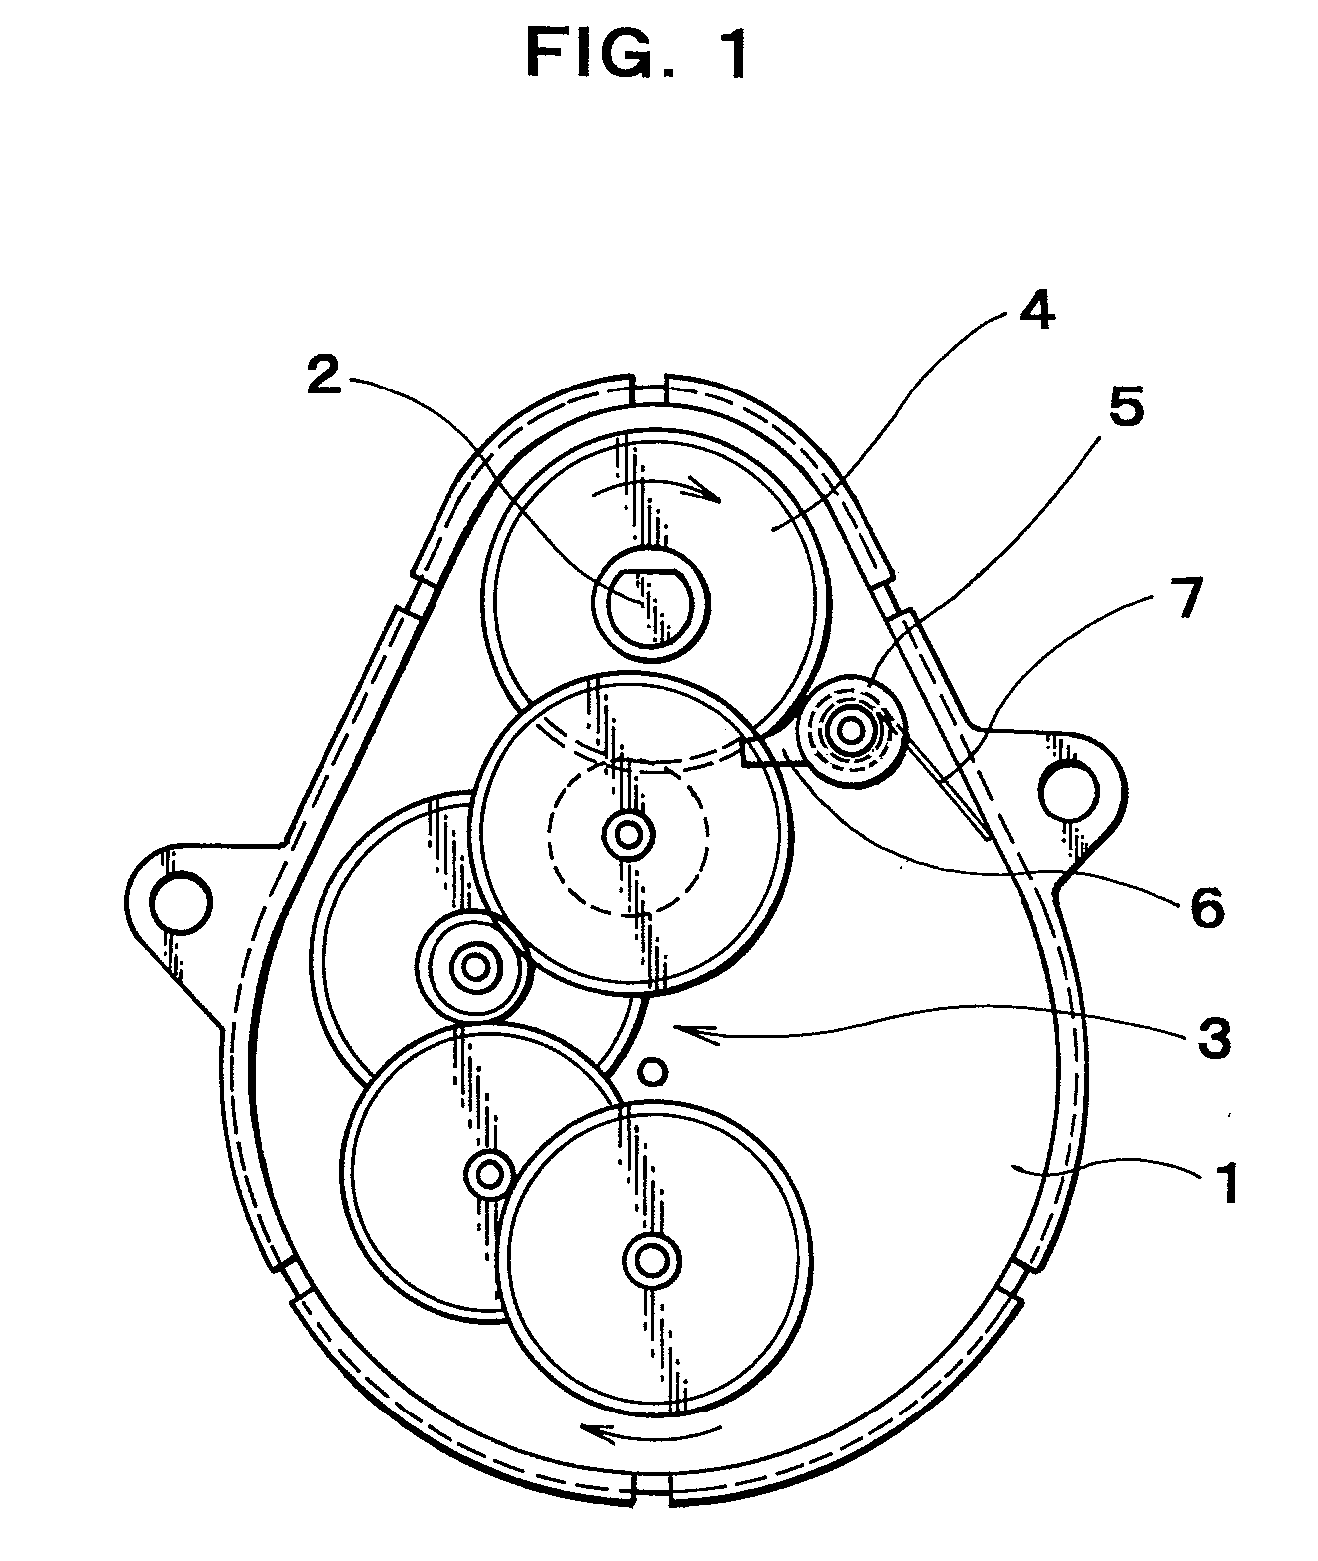 Induction Motor with Ratchet Device